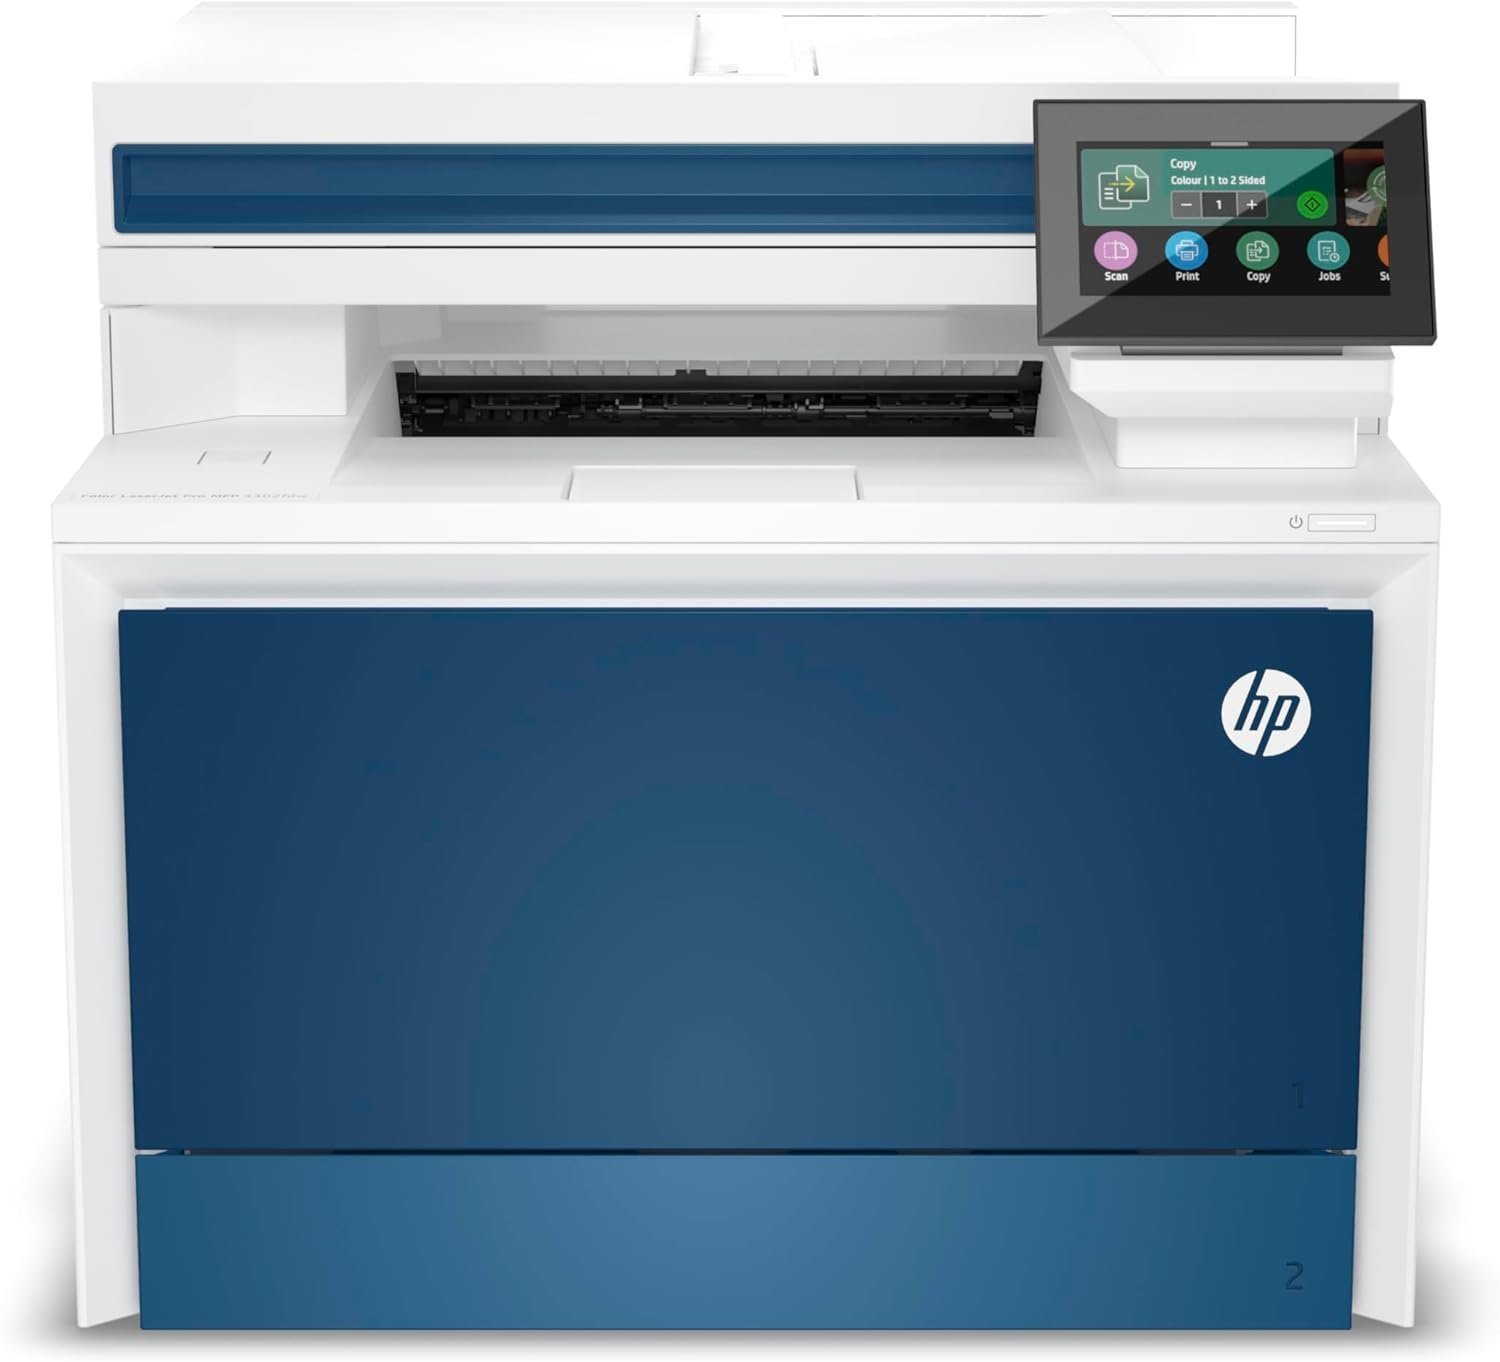 HP Color LaserJet Pro MFP 4301fdw Wireless Printer, Print, scan, copy, fax, Fast speeds, Easy setup, Mobile printing, Advanced security, Best-for-small-teams, Instant Ink eligible